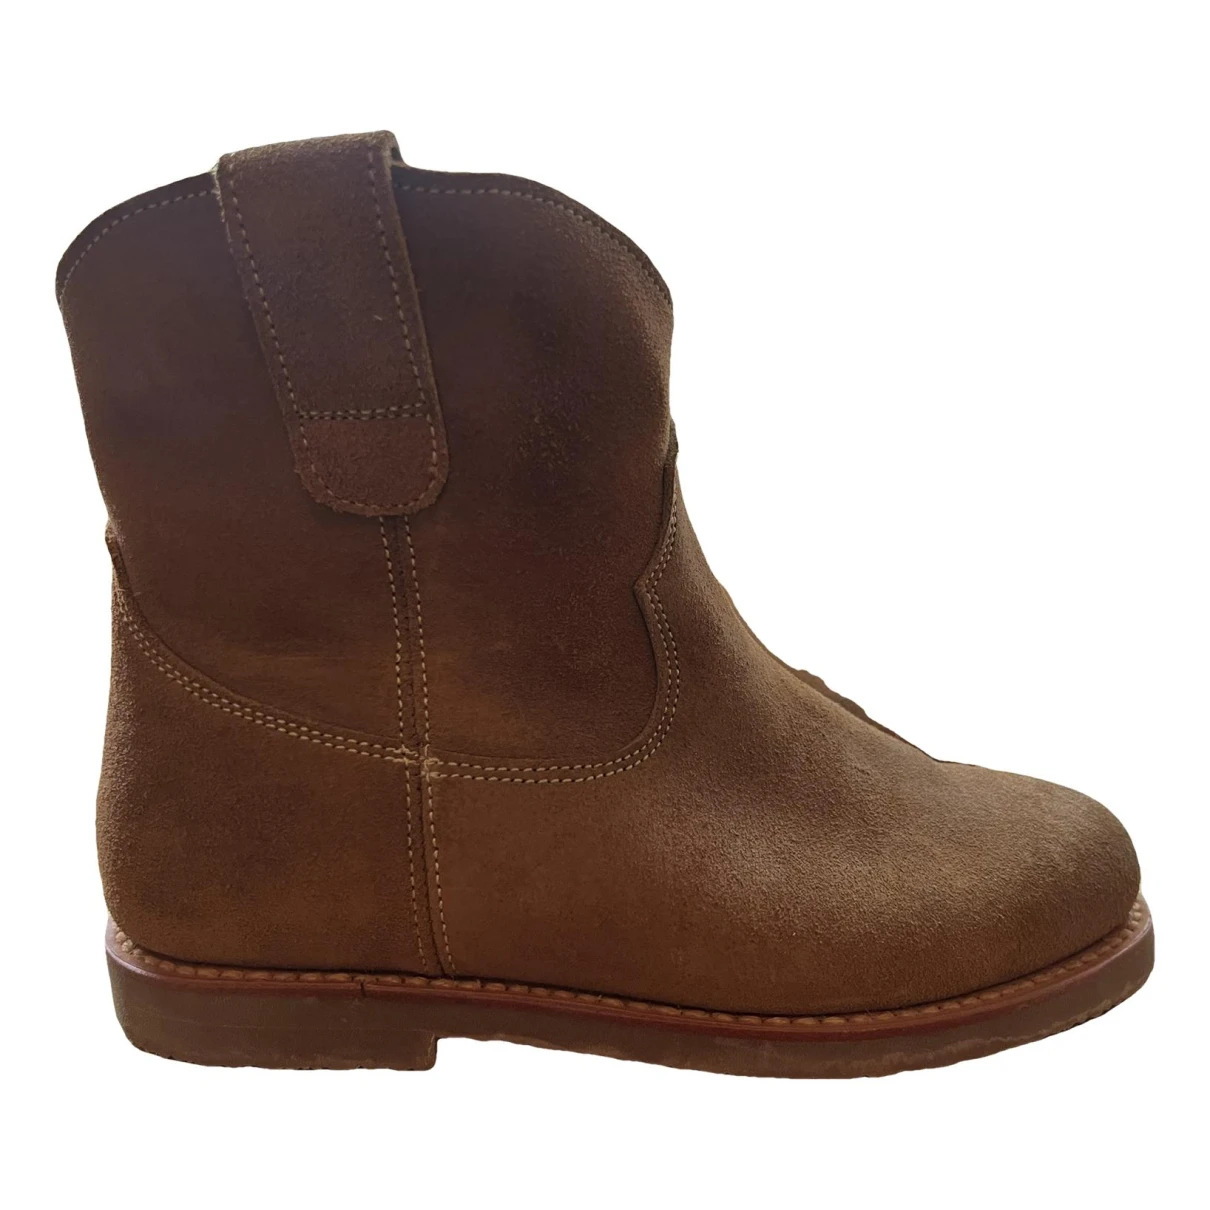 Pre-owned Penelope Chilvers Ankle Boots In Camel